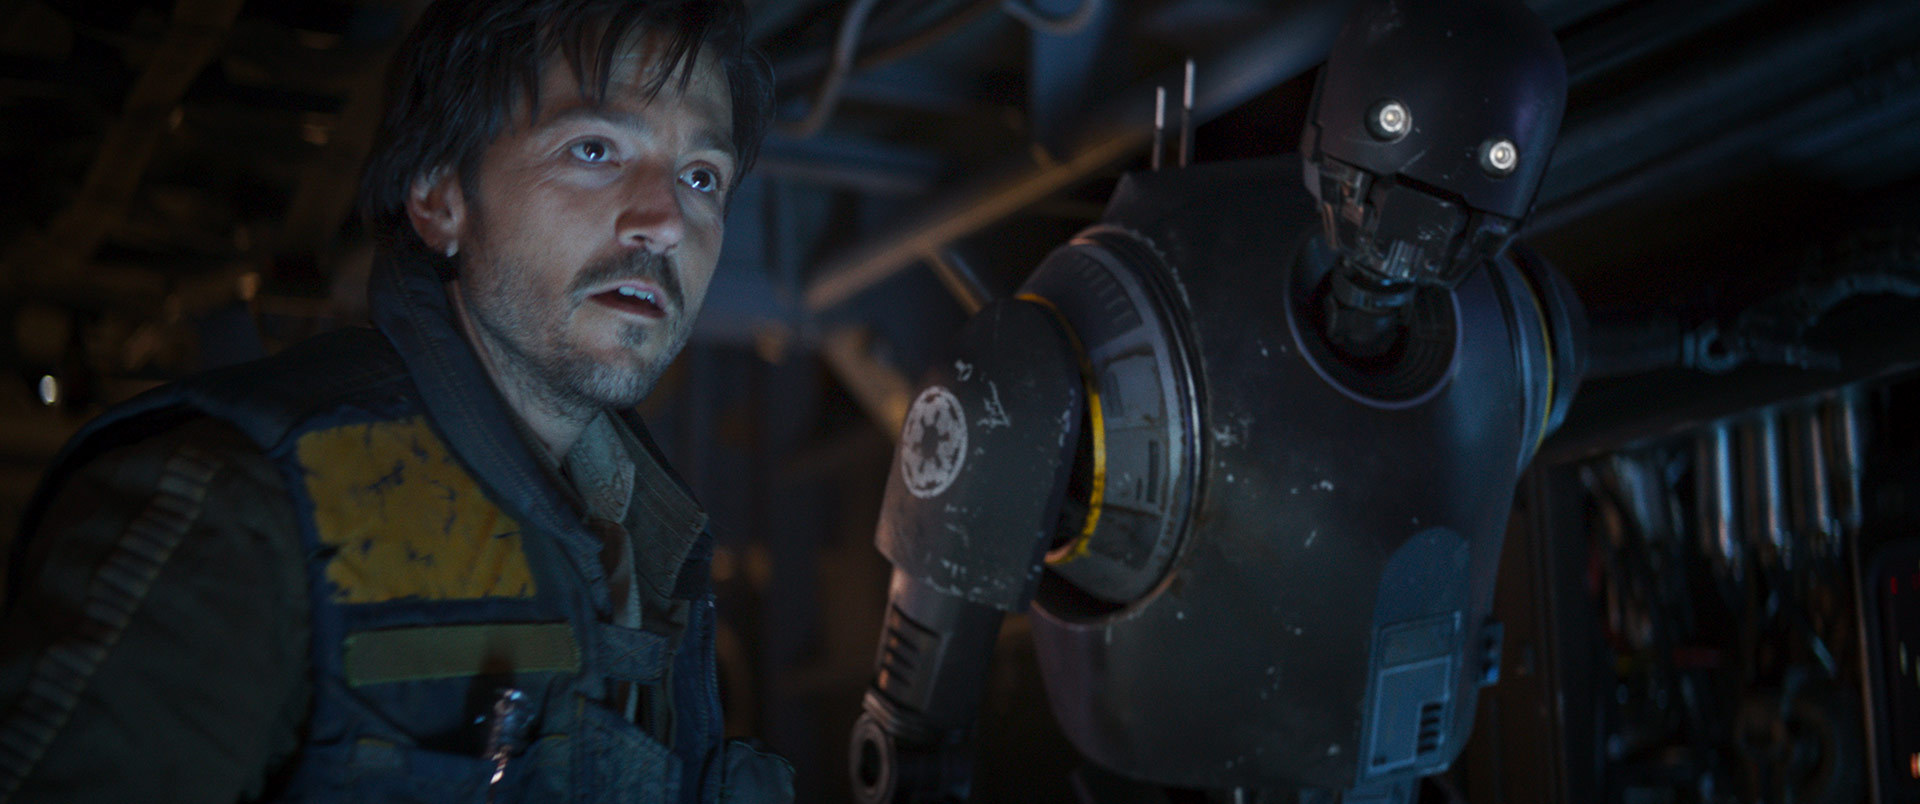 Rogue One: A Star Wars Story - Cassian Andor with K-2SO